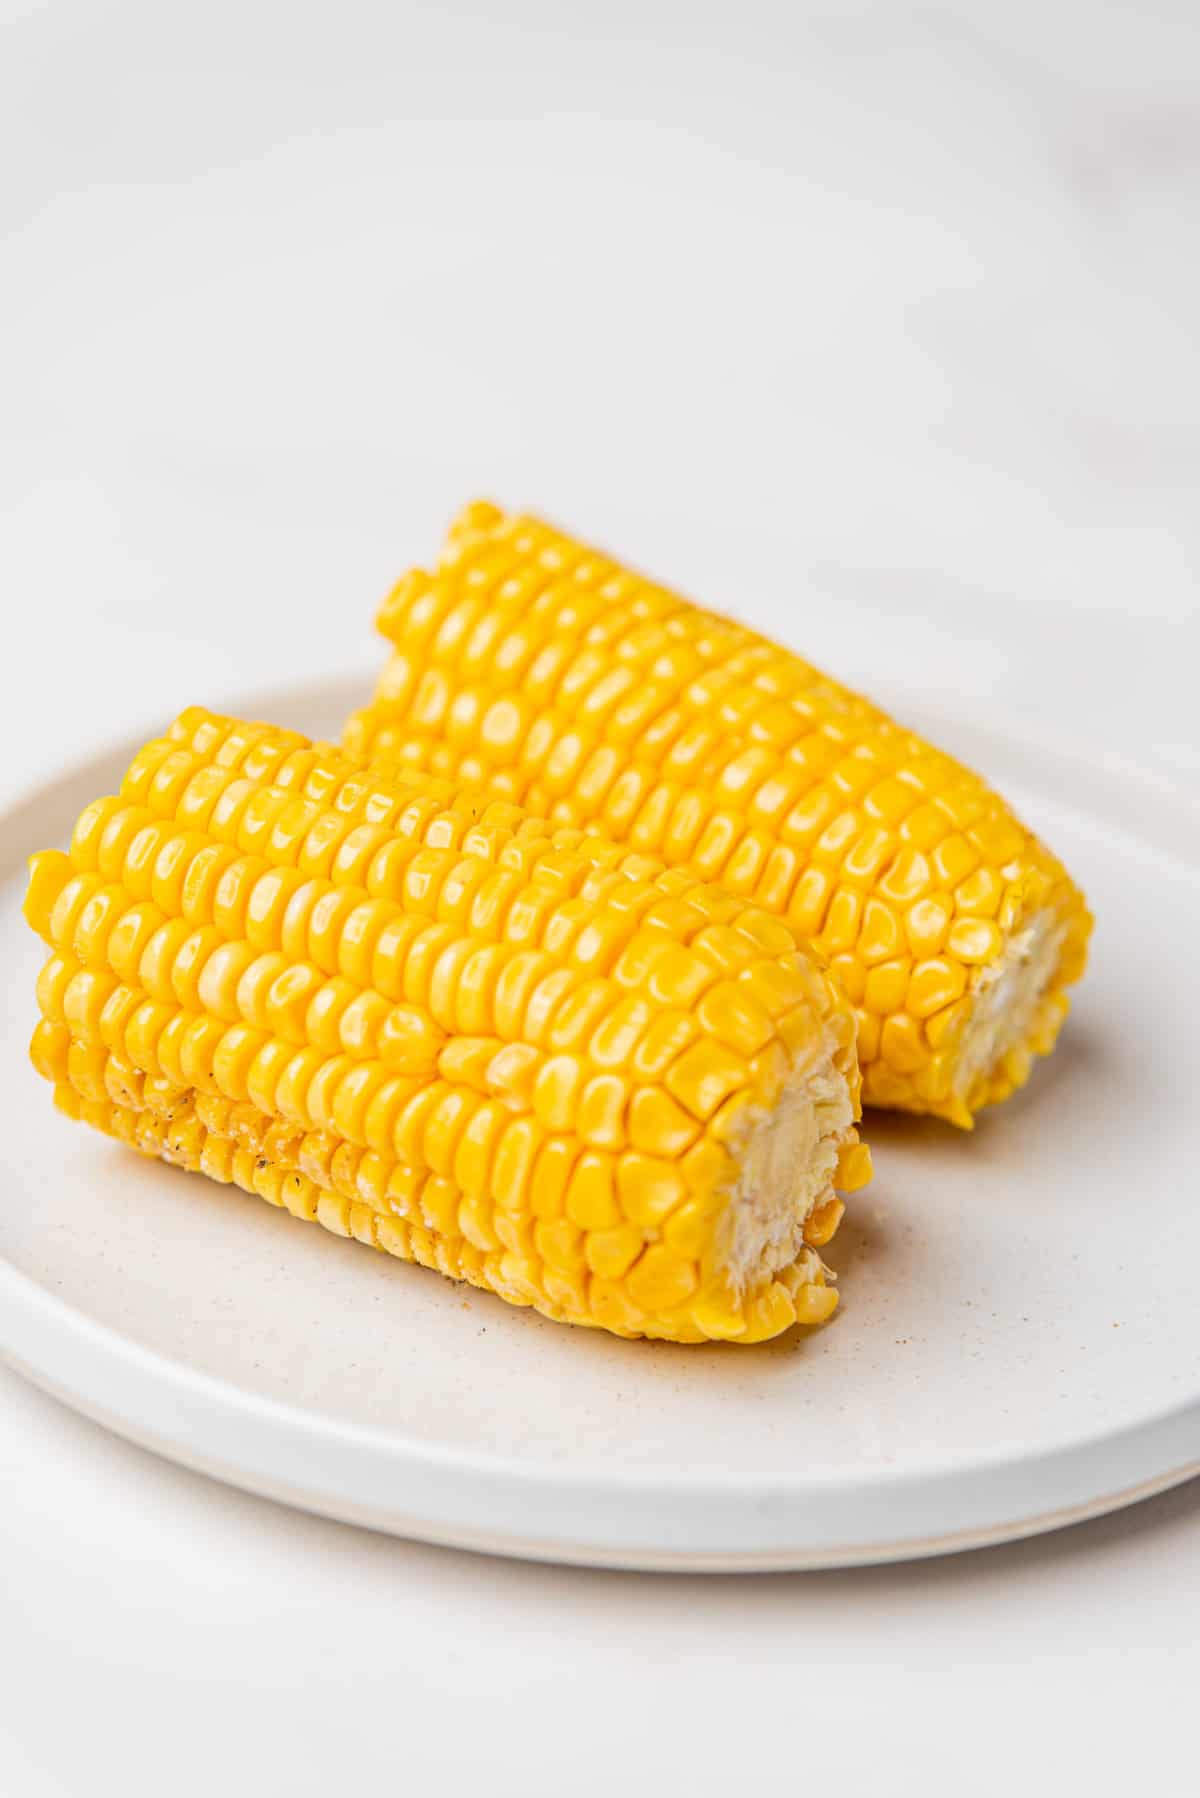 An image of a halved corn served on a plate